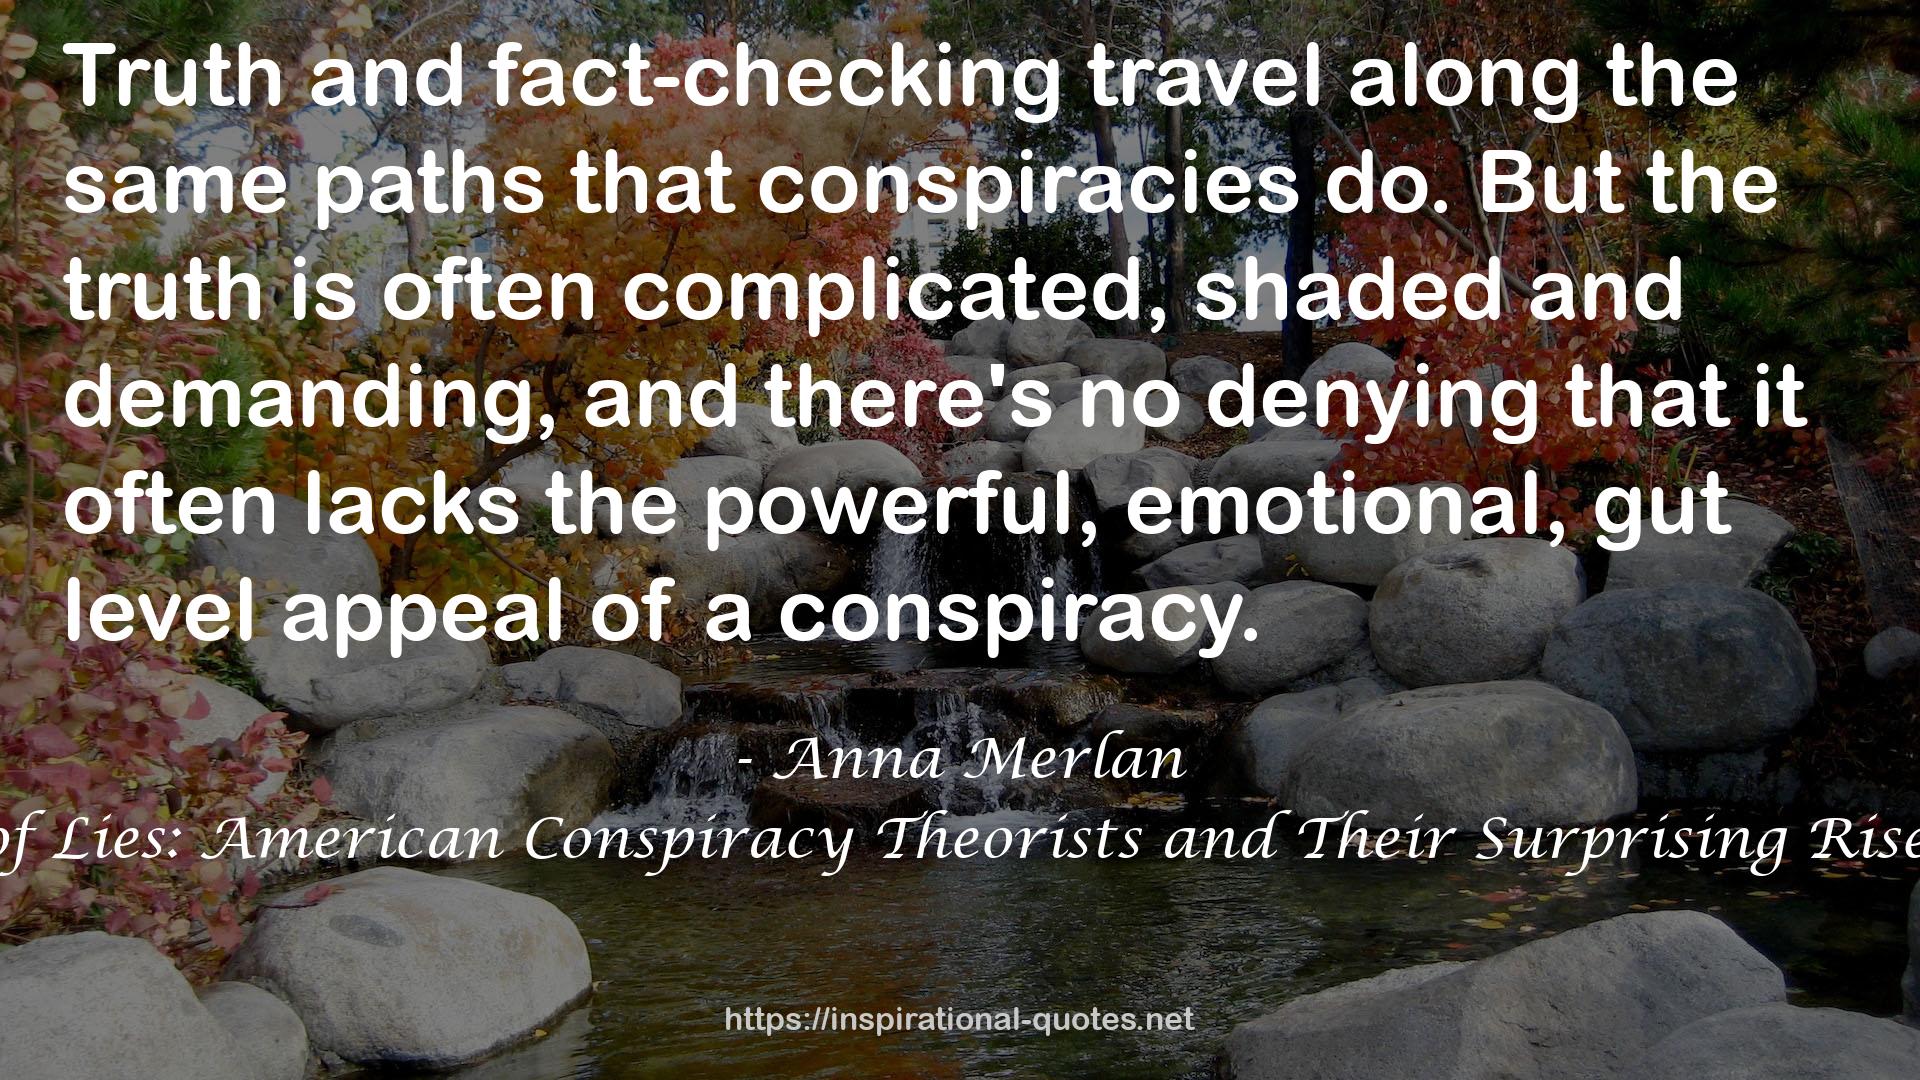 Republic of Lies: American Conspiracy Theorists and Their Surprising Rise to Power QUOTES